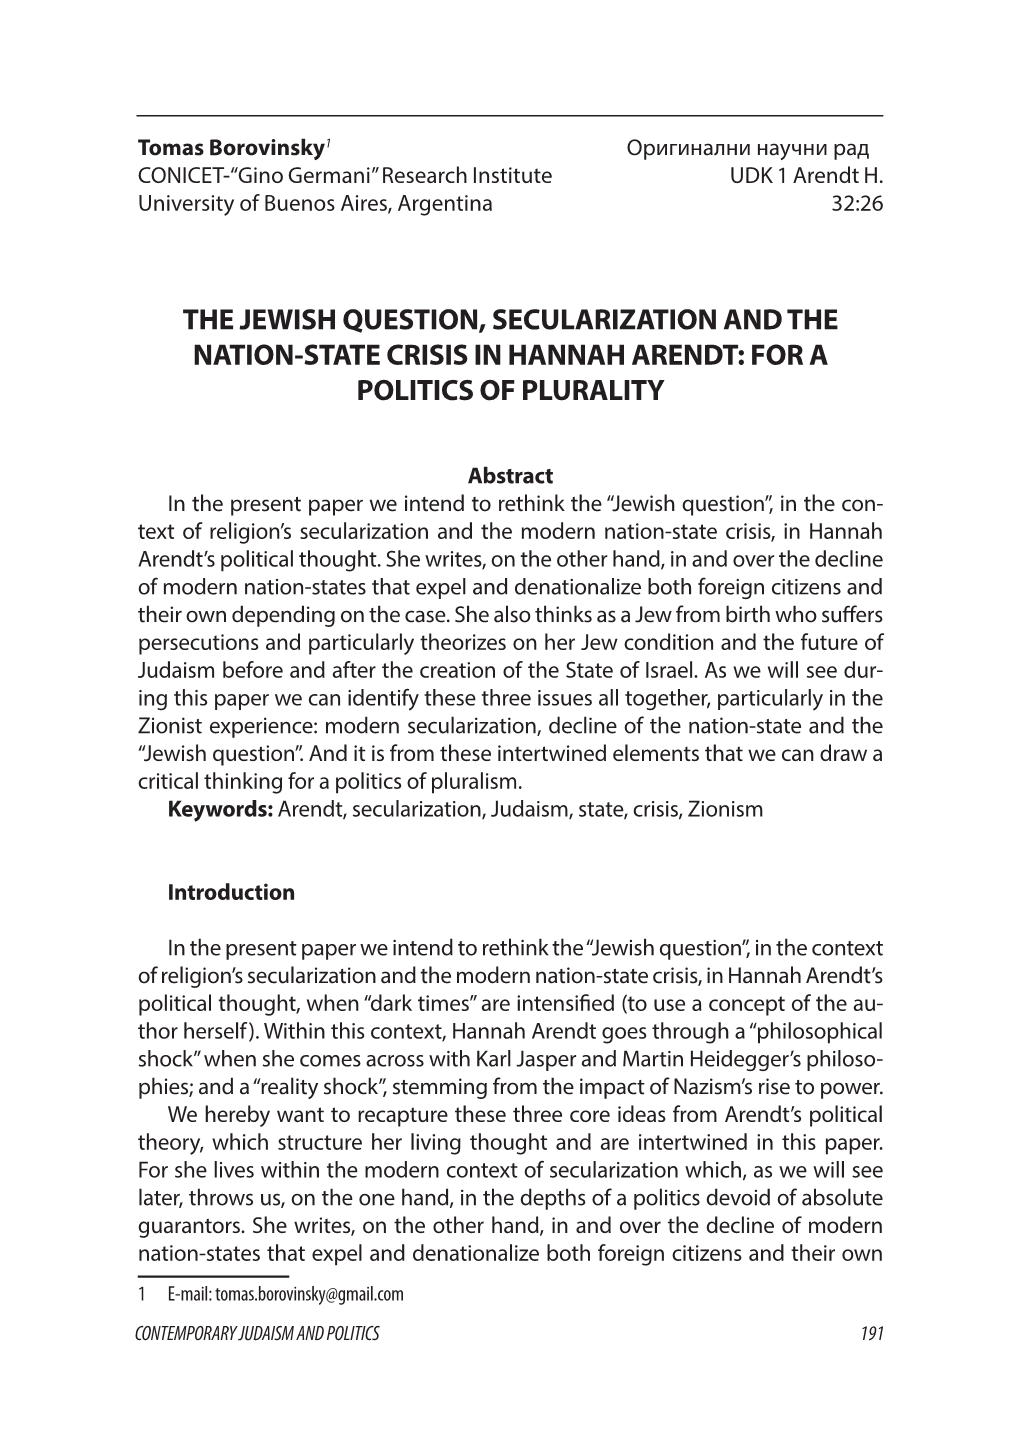 The Jewish Question, Secularization and the Nation-State Crisis in Hannah Arendt: for a Politics of Plurality